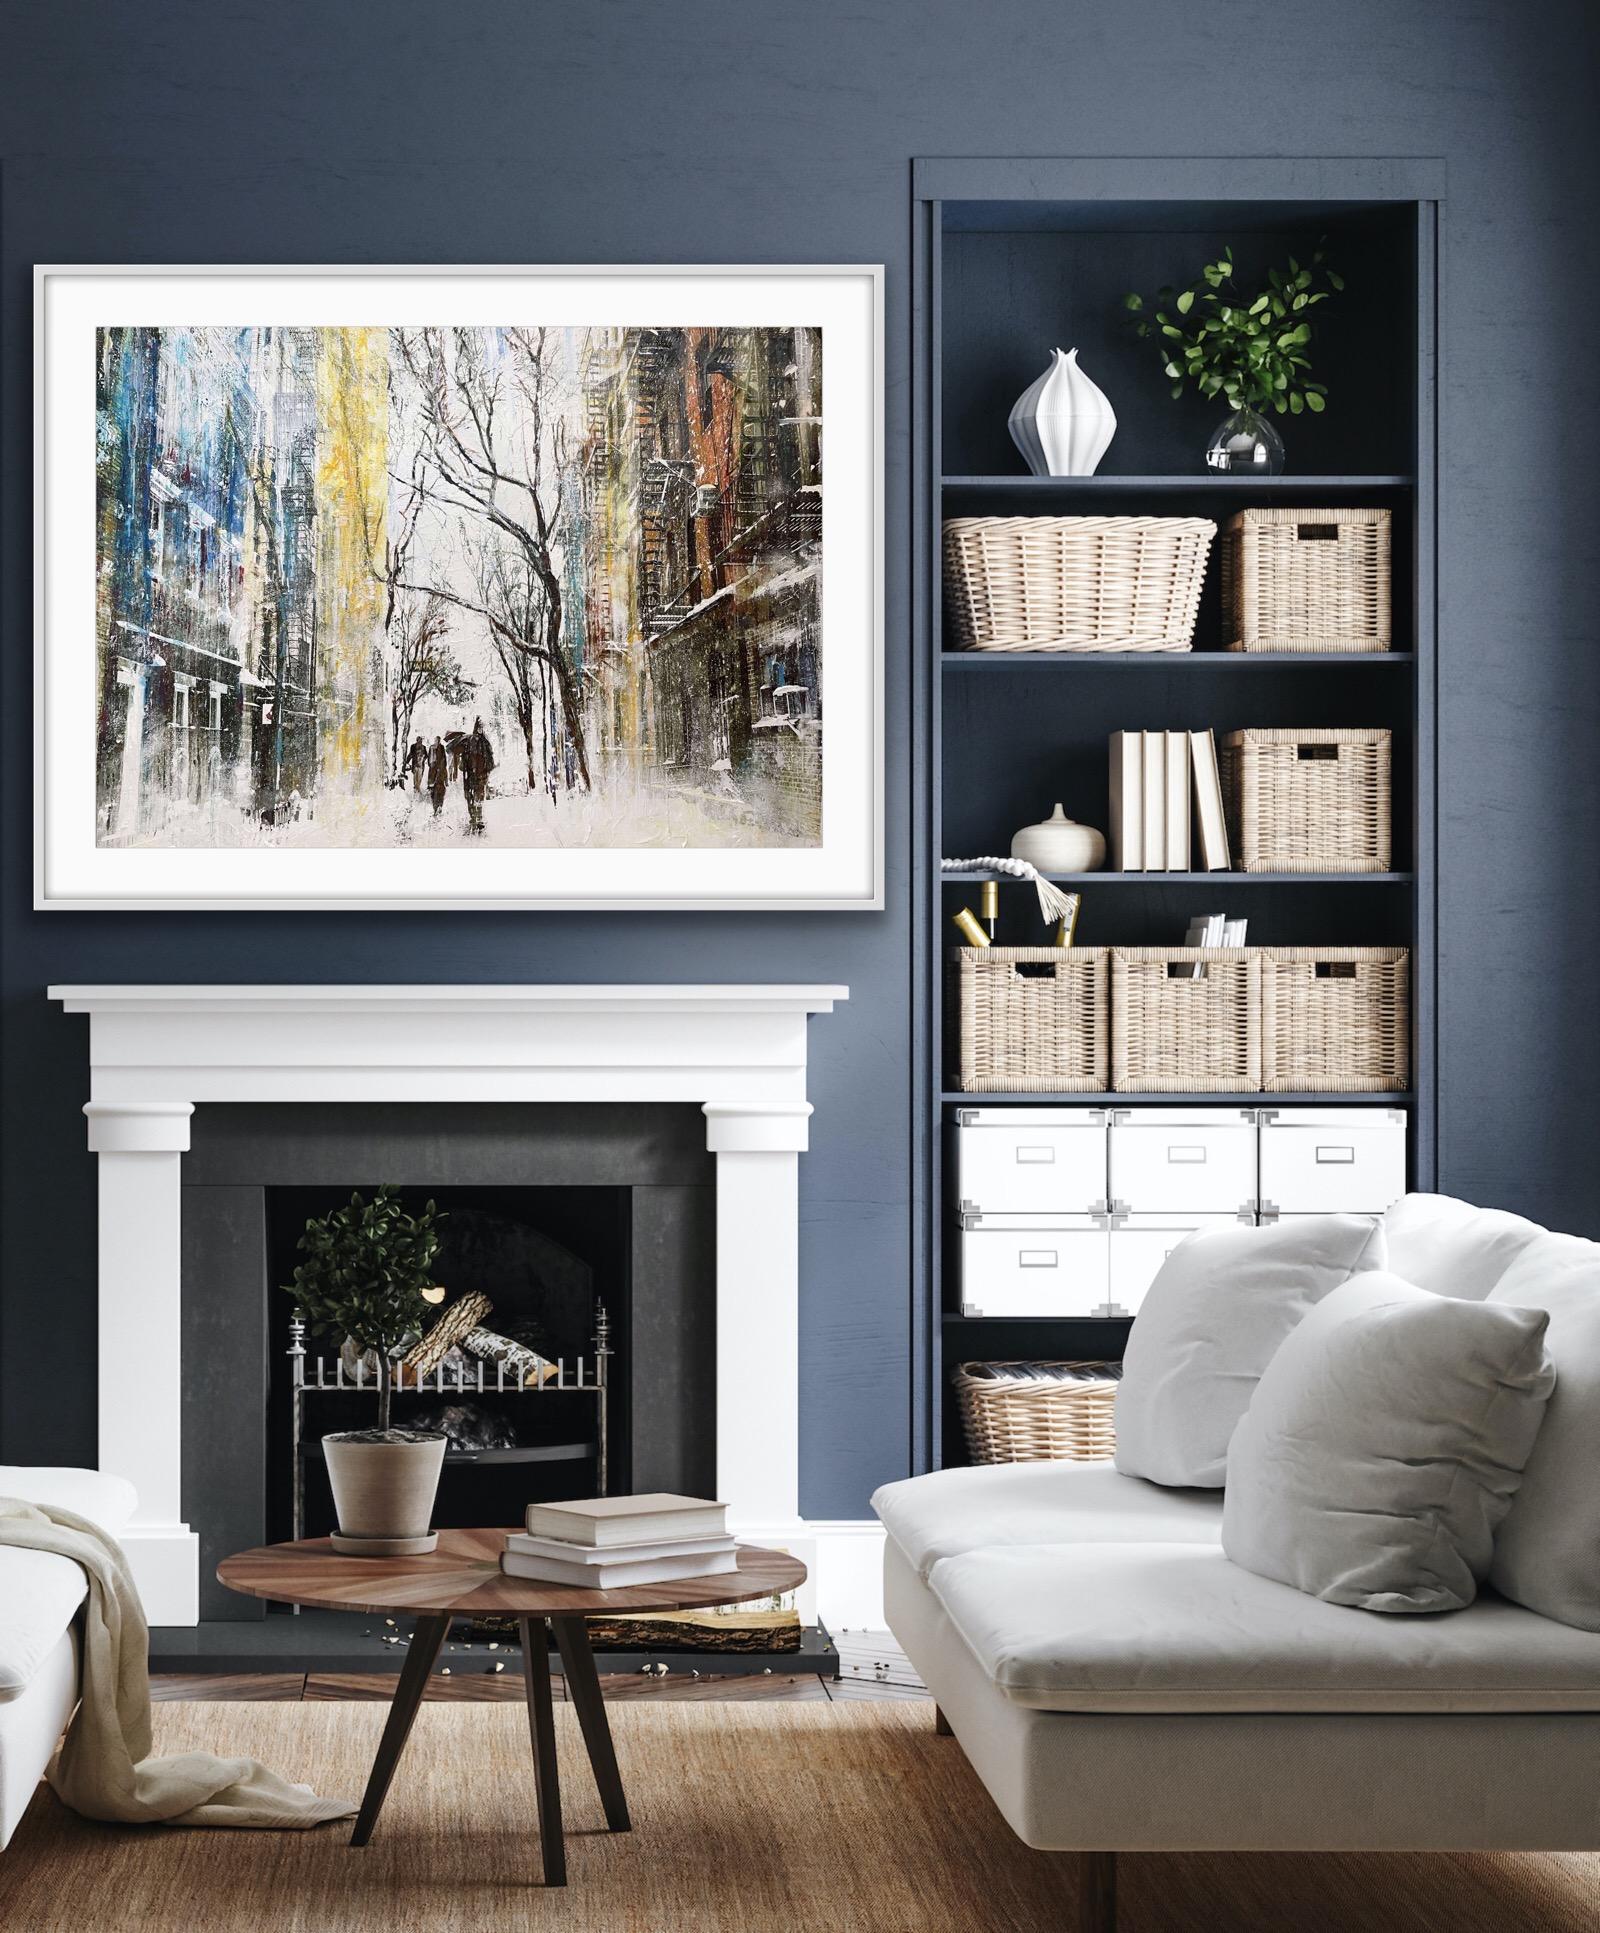 Snowy New York [2020]
Please note that insitu images are purely an indication of how a piece may look

Snowy New York is an original work by artist Gill Storr. Based from a winter's scene in a New York street. Painted from an image of one of my many